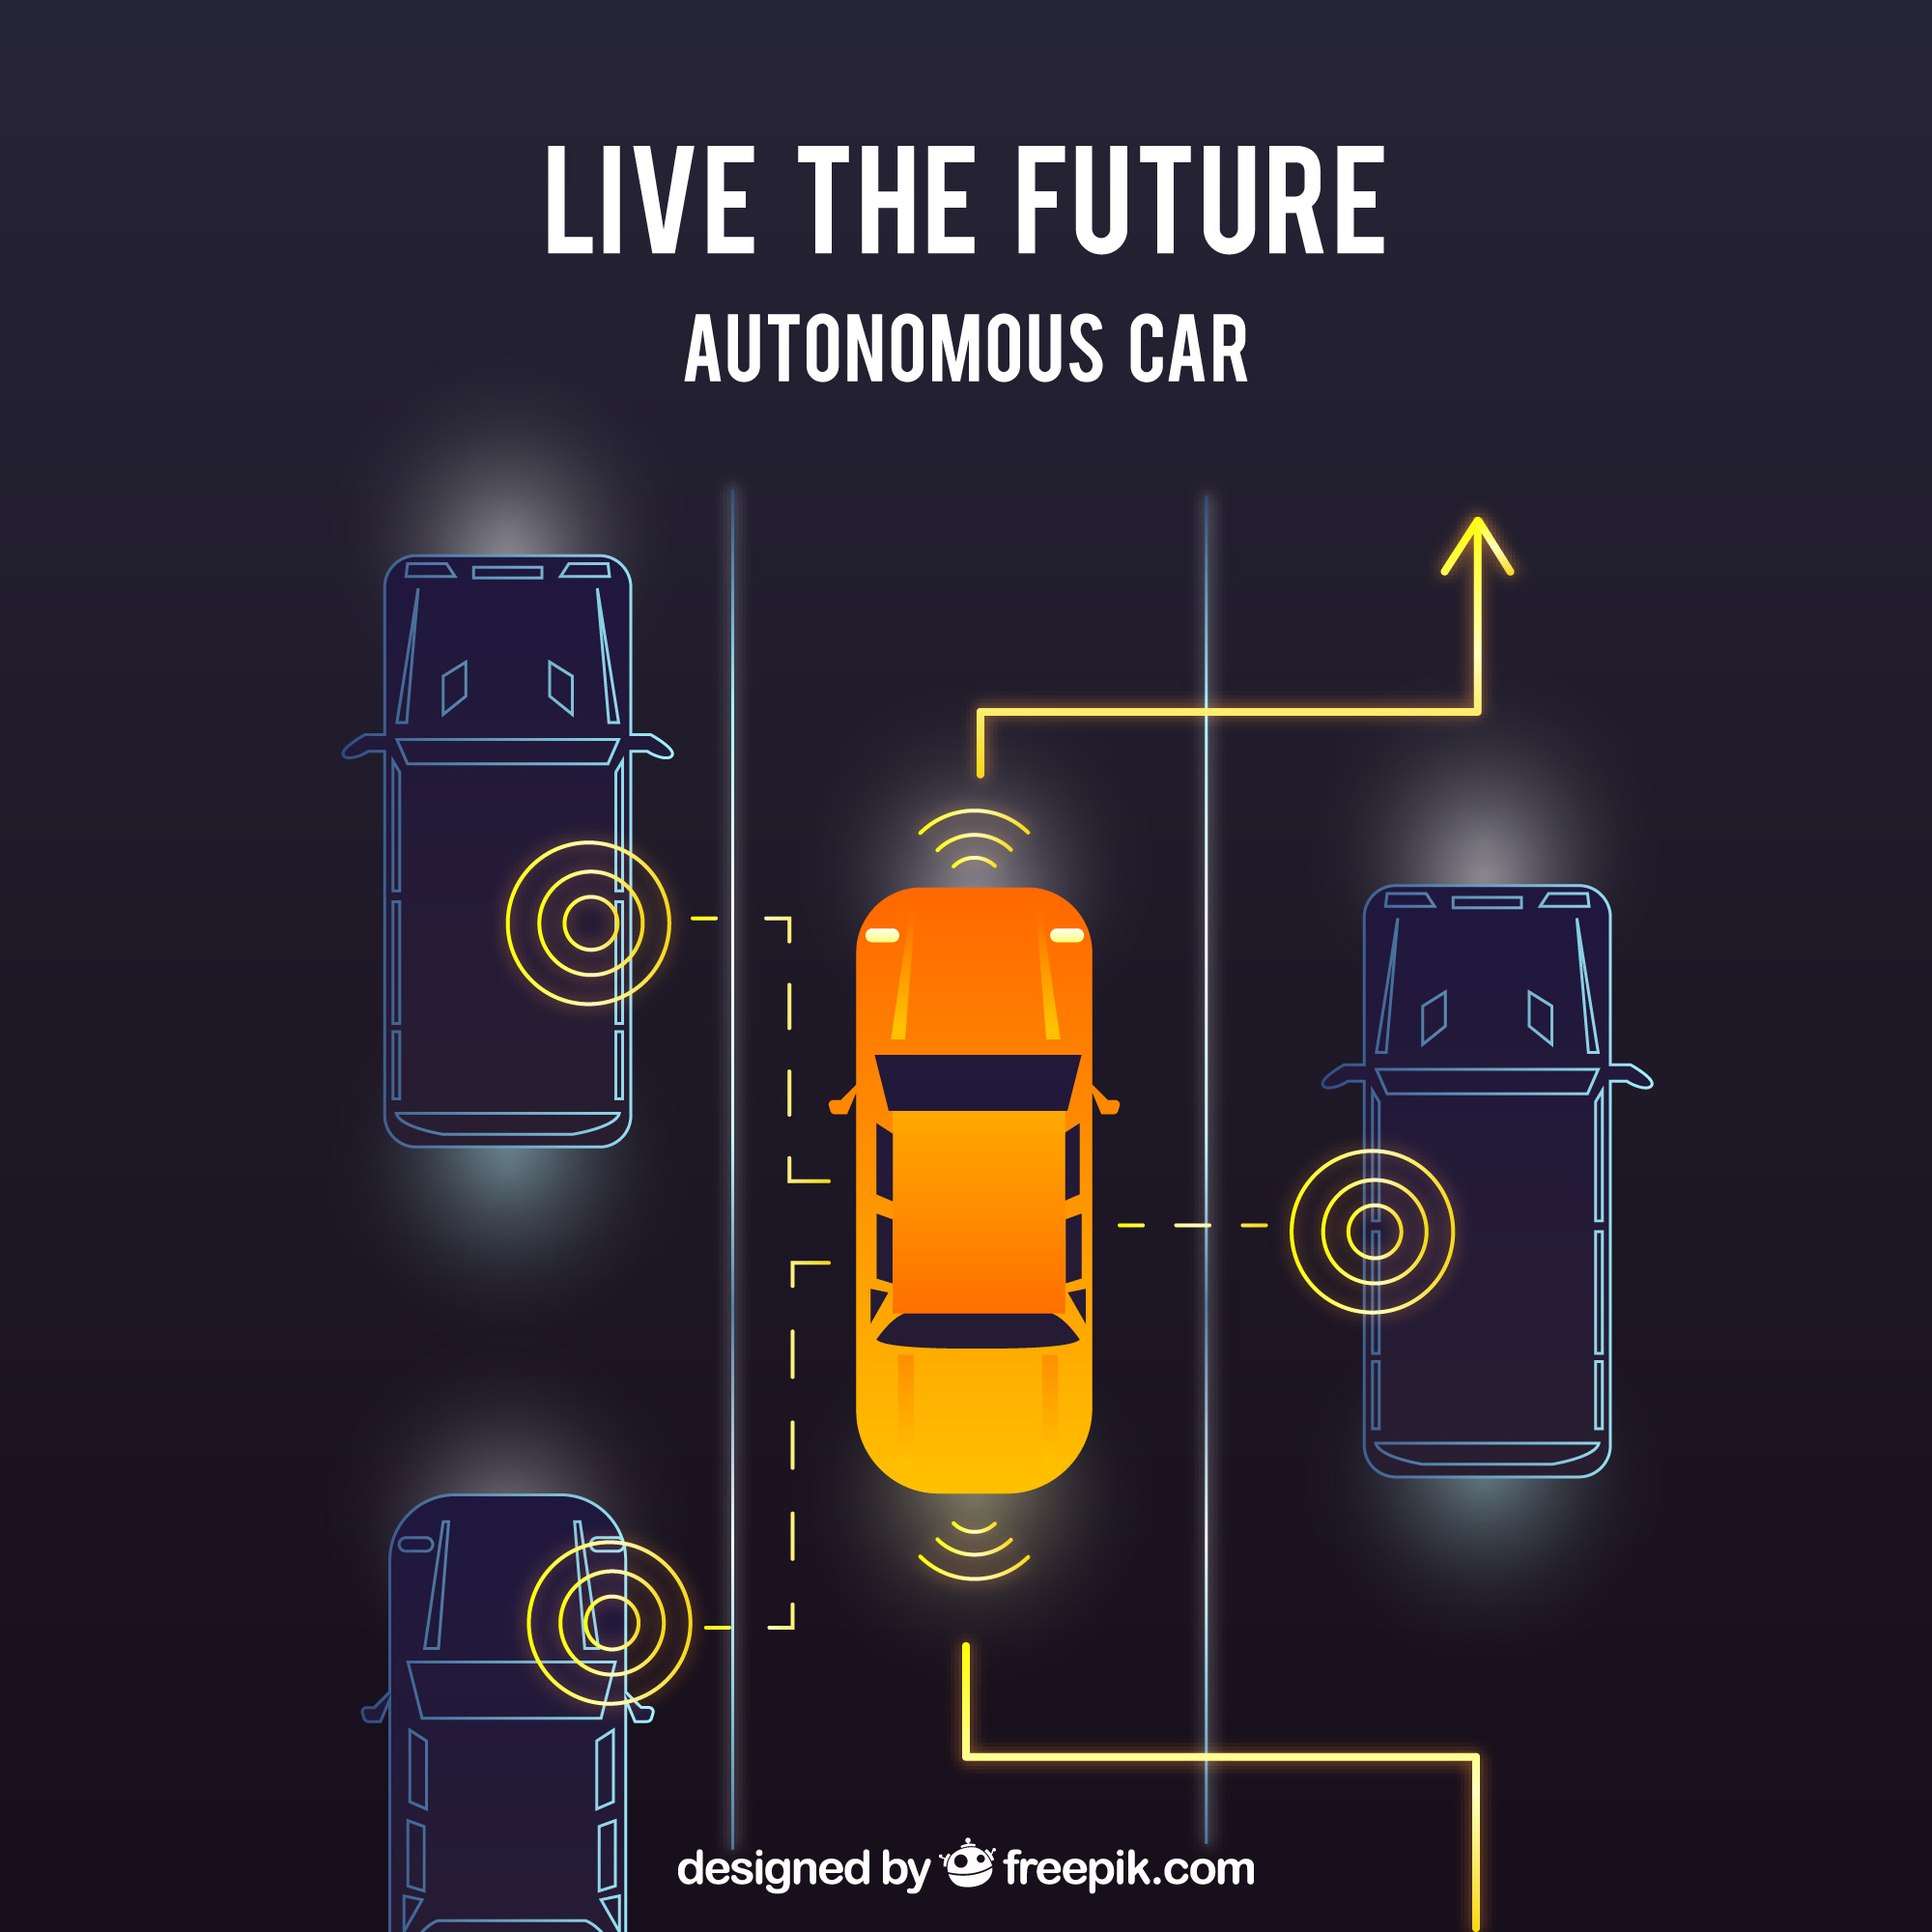 New Level 4 Autonomous Driving Regulation boosts Germany's future in driverless mobility 2